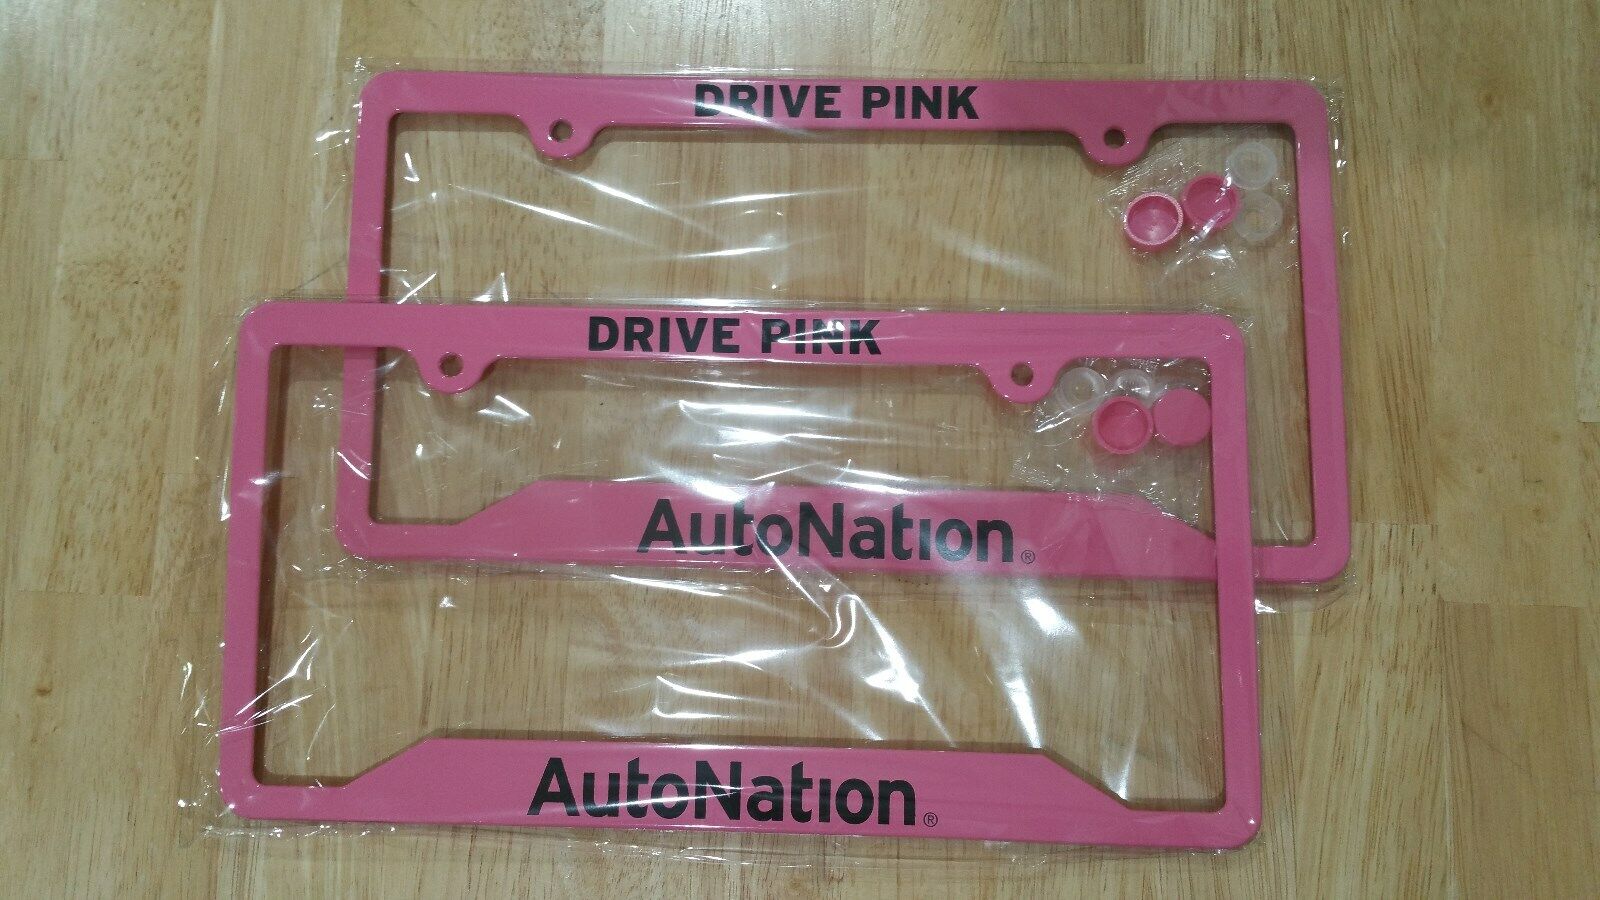 A PAIR - TWO - 2 PINK DRIVE PINK AUTO NATION LICENSE PLATE METAL FRAME BRAND NEW